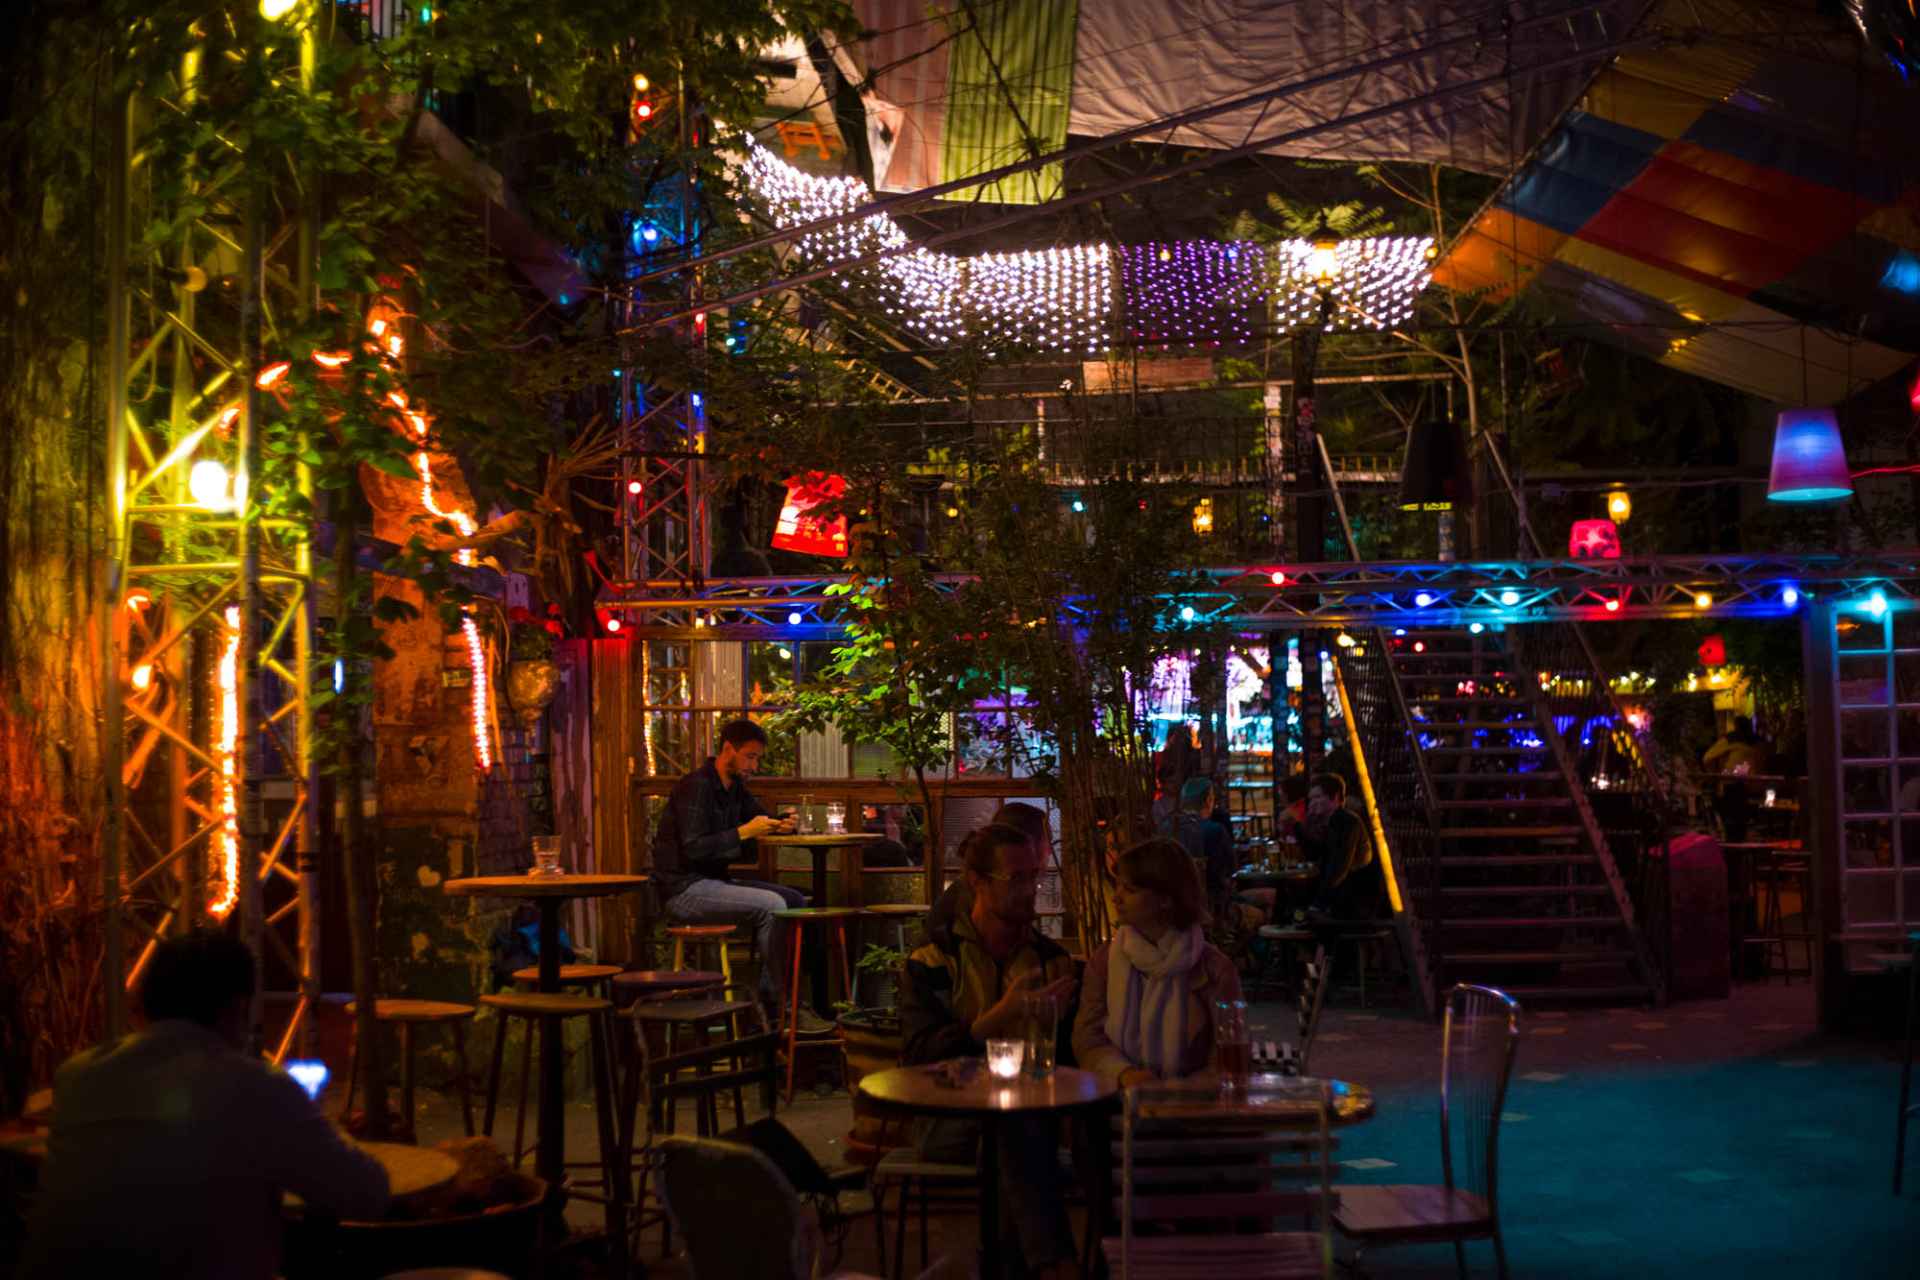 people-sat-around-drinking-in-dark-quirky-indie-bar-szimpla-kert-4-days-in-budapest-itinerary